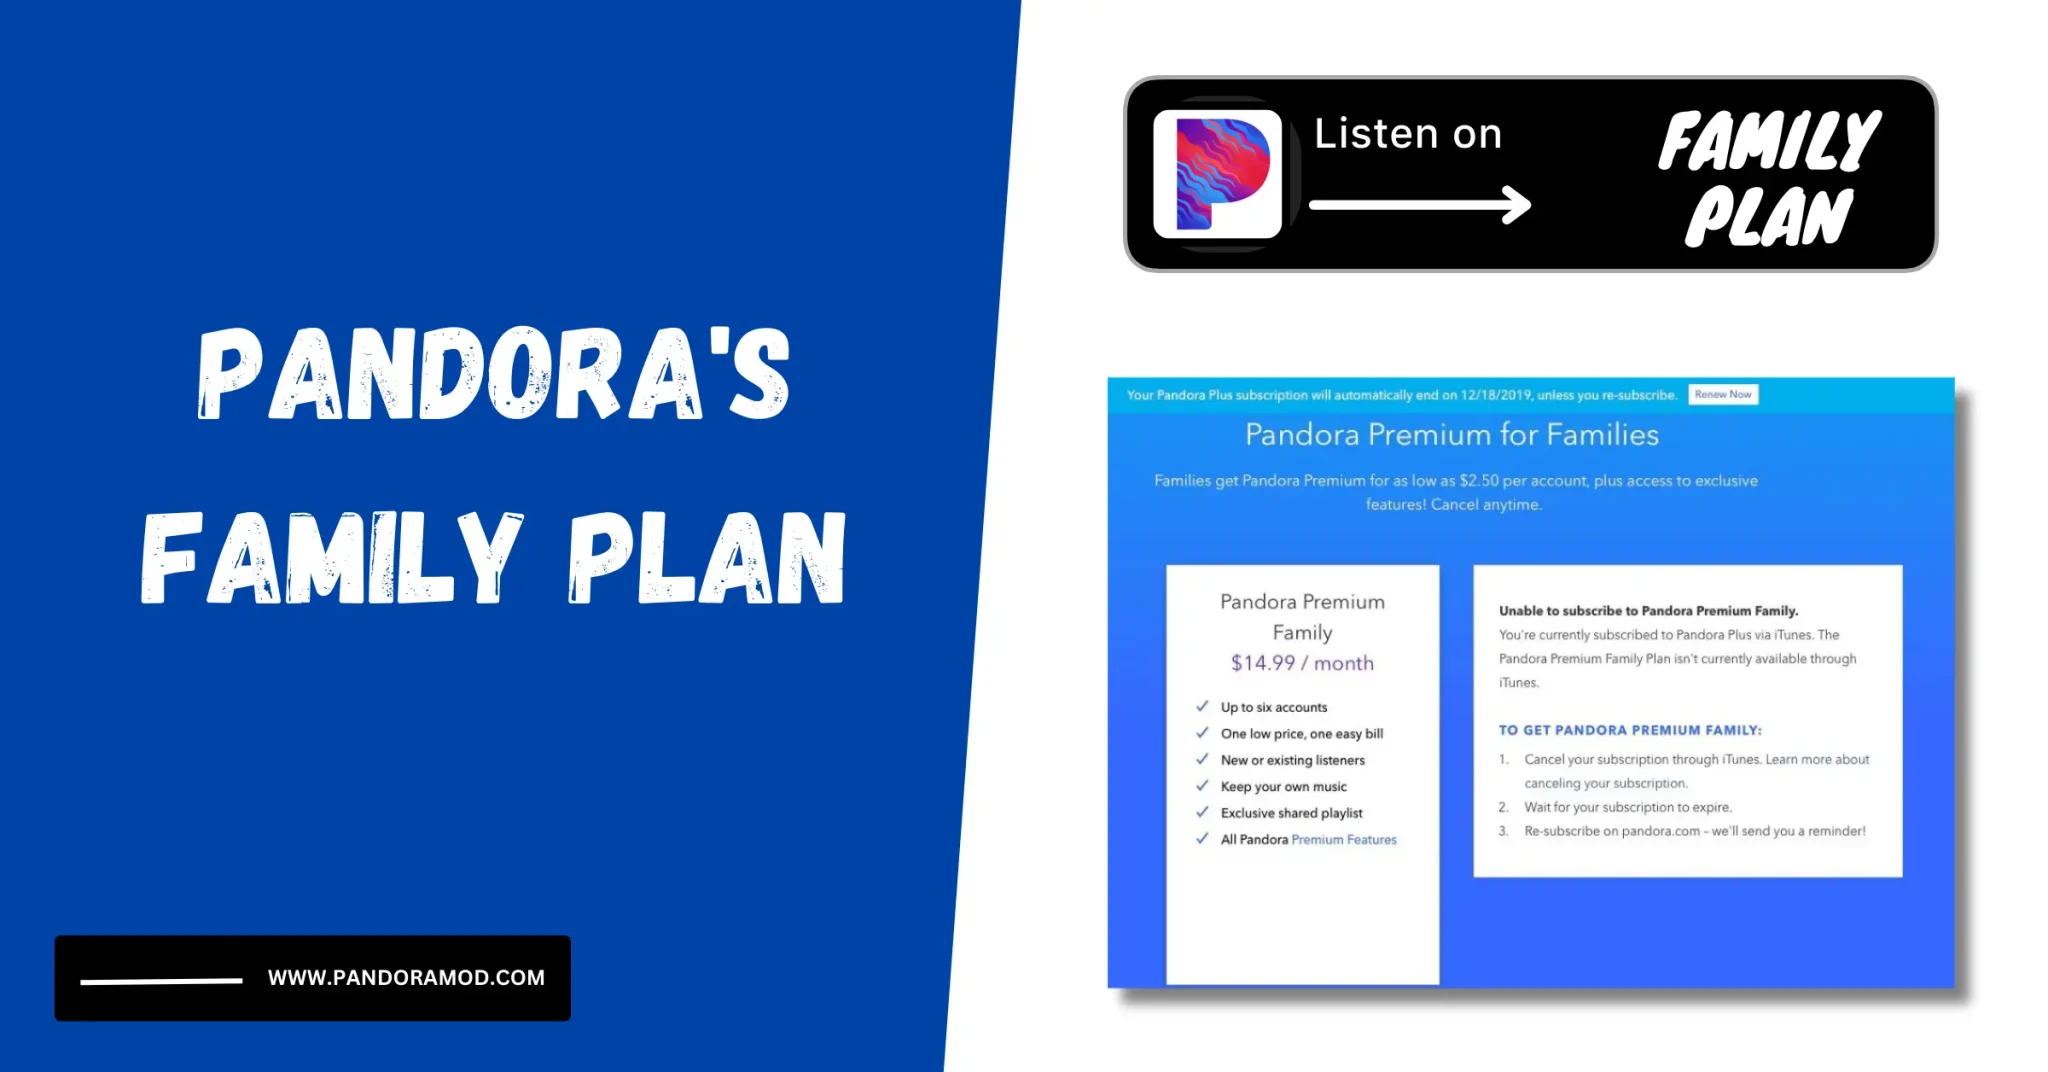 How does Pandora's family Plan work